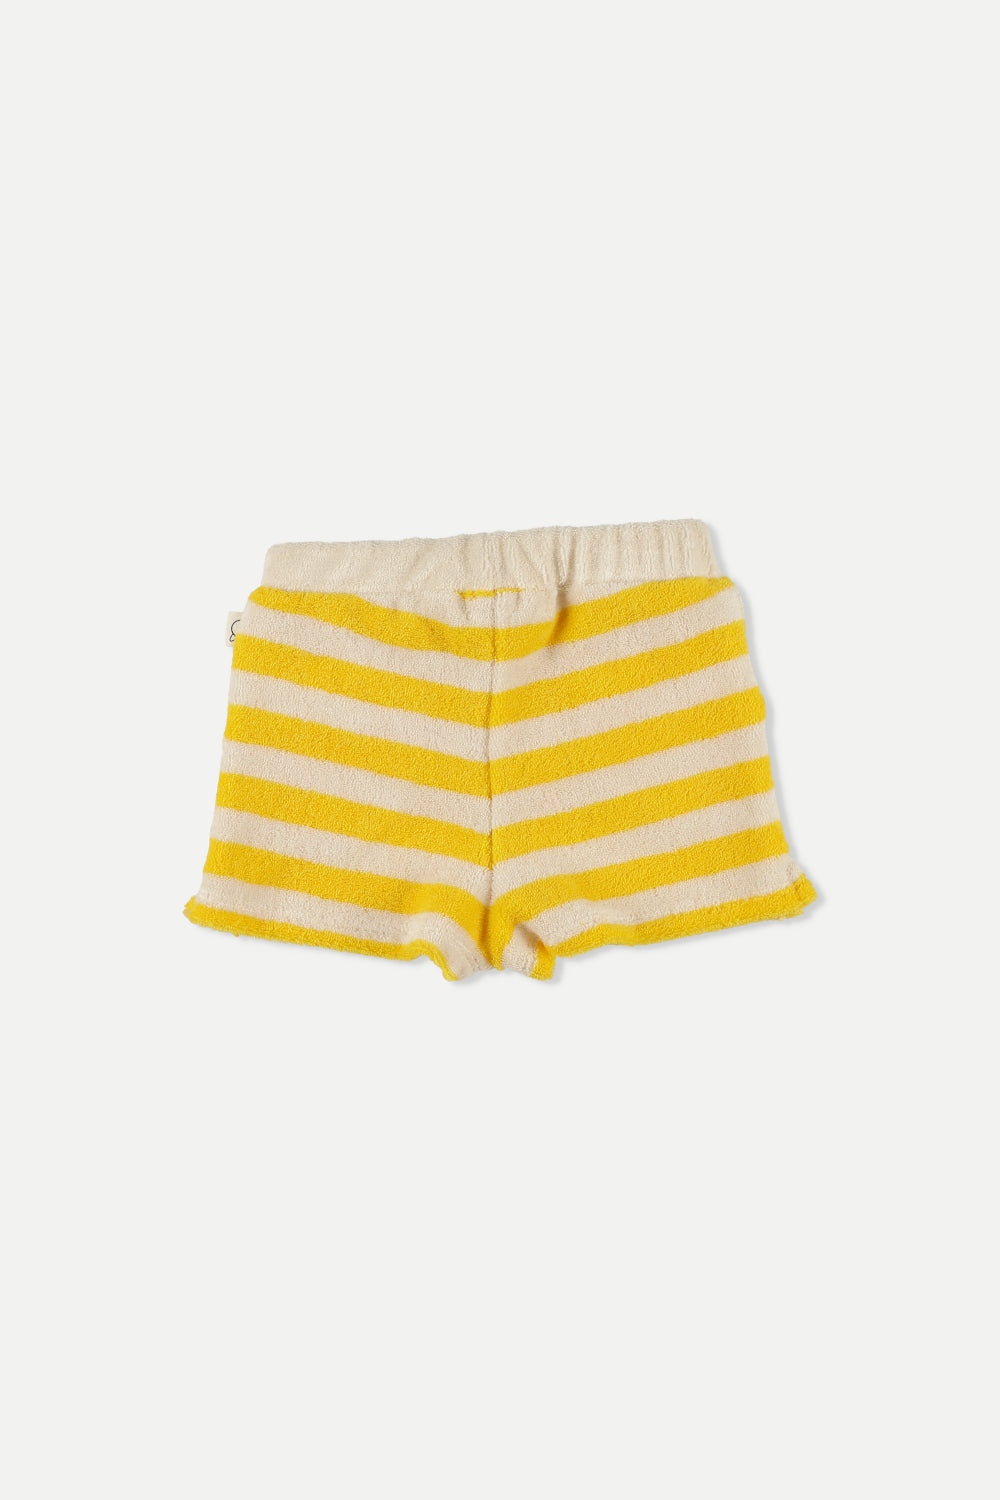 My little cozmo - mayles269 - terry stripes shorts - yellow